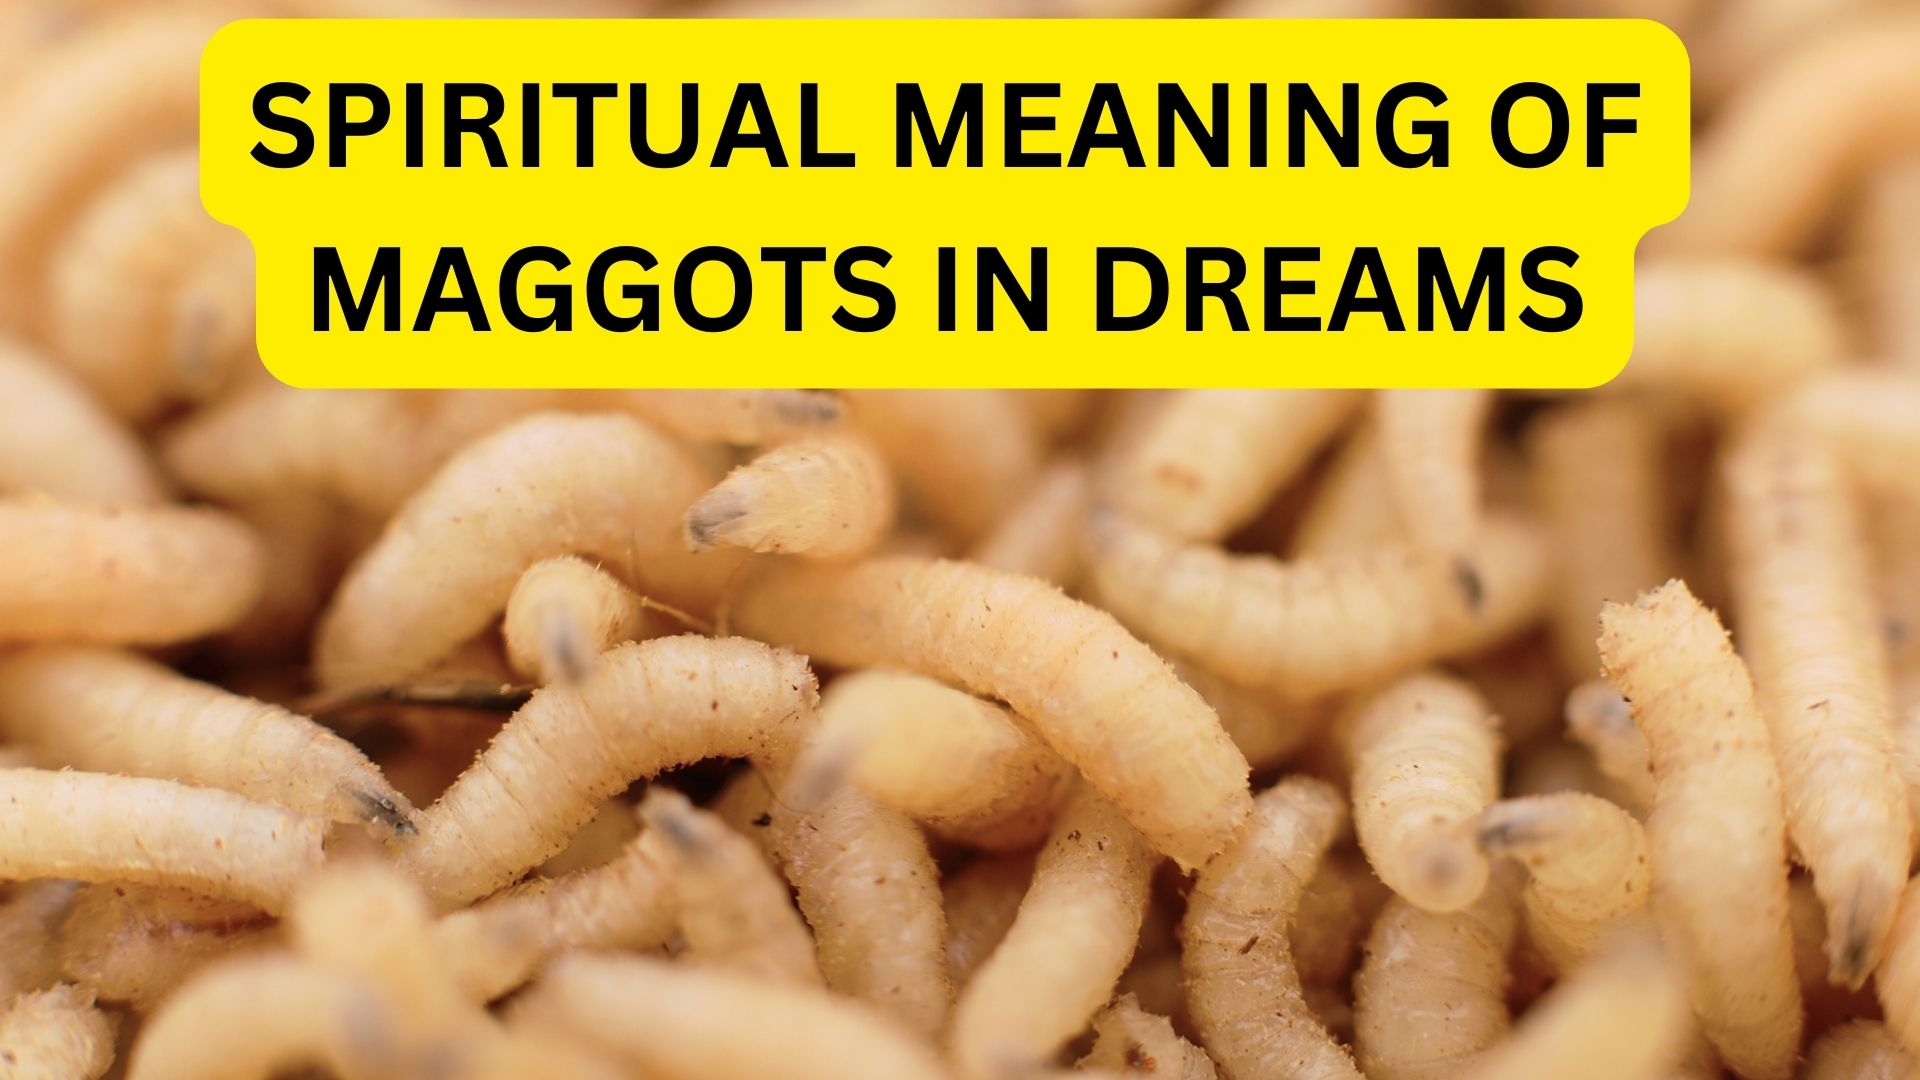 Spiritual Meaning Of Maggots In Dreams - It Indicates Negative Influences